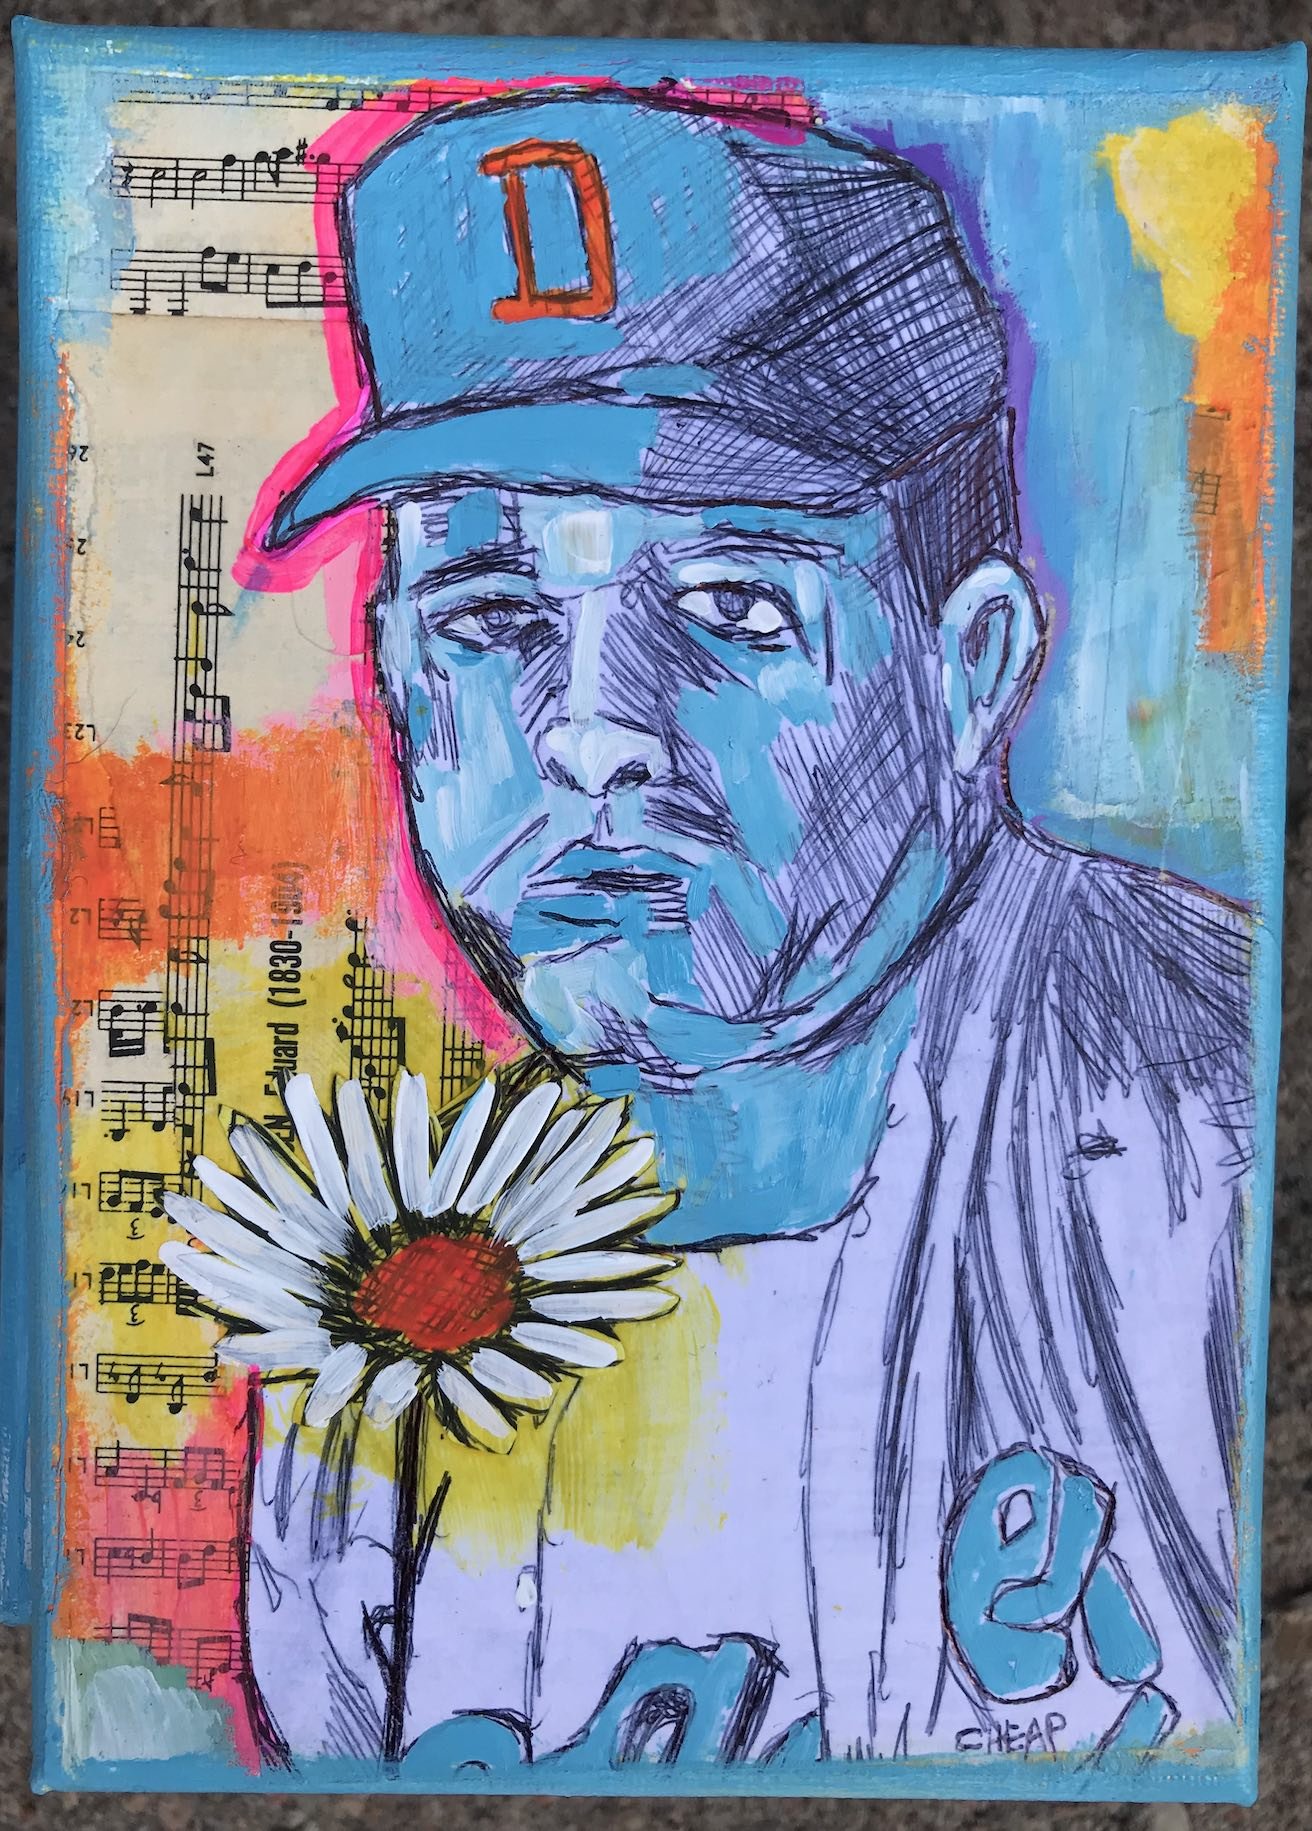 Denver Bears baseball player painting 1 by Vincent Cheap.